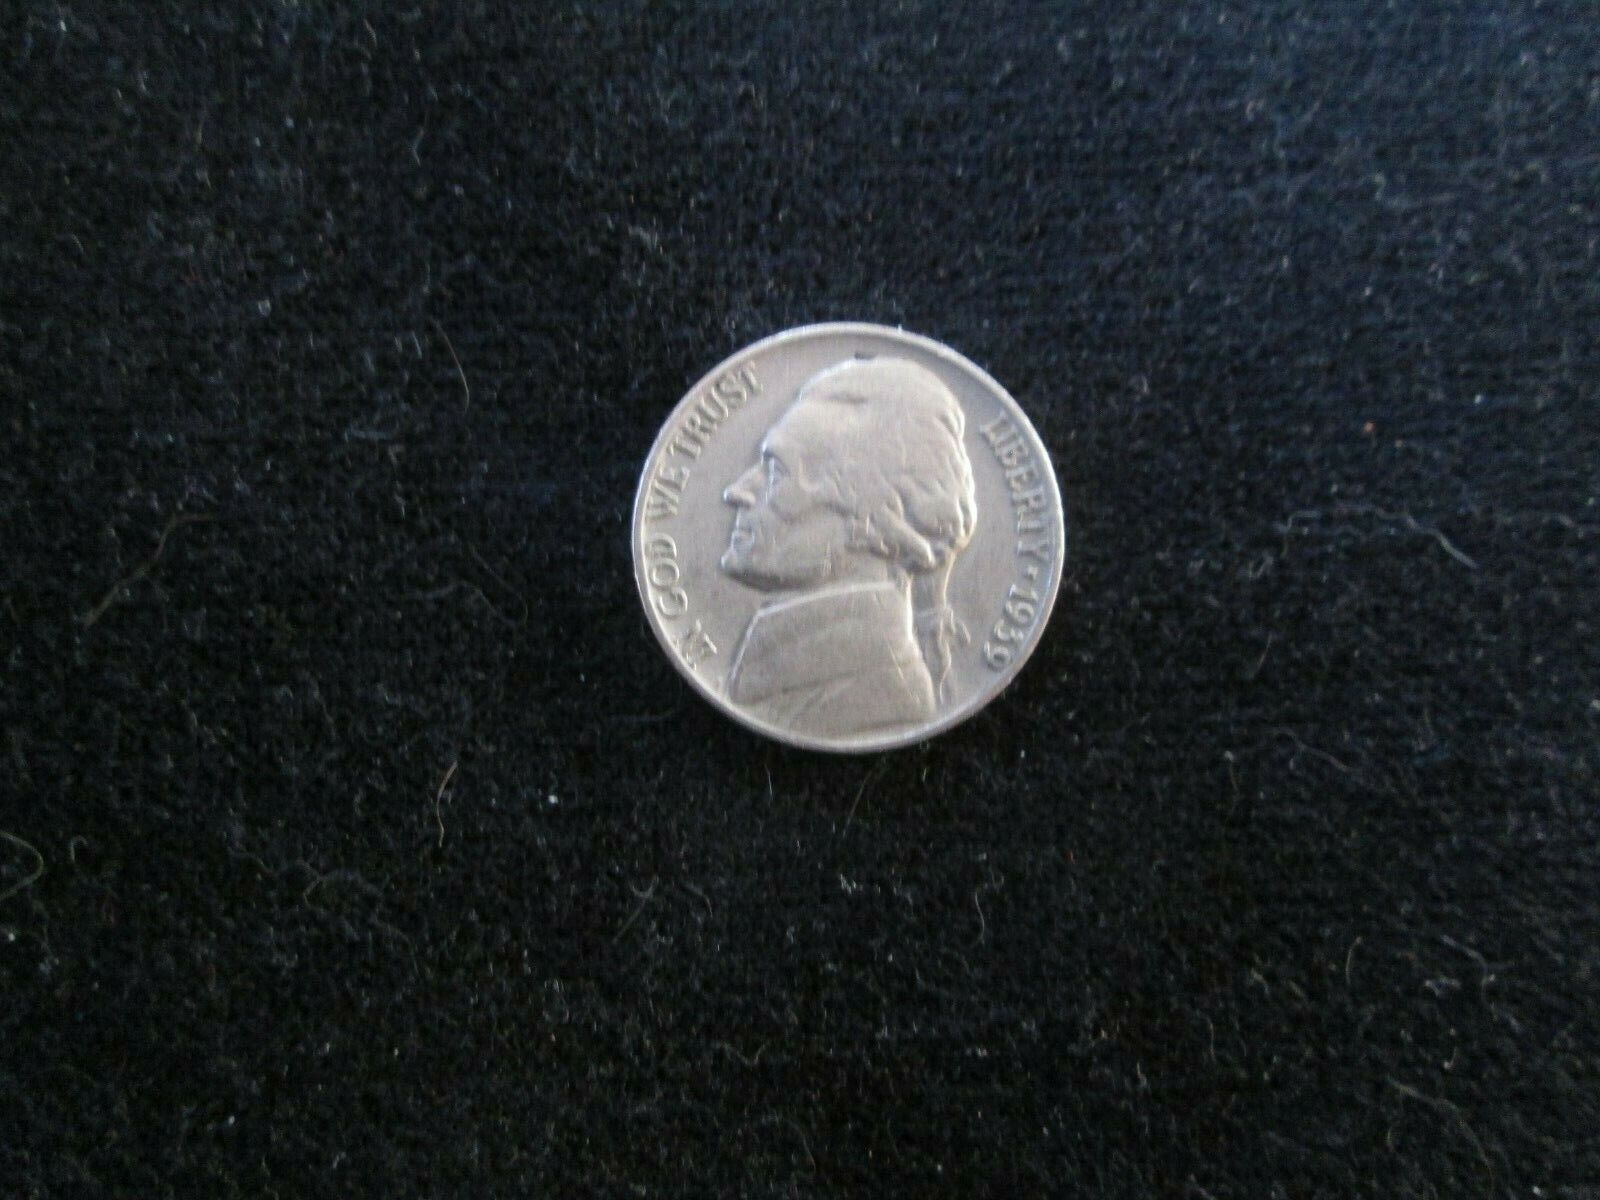 1939 USA 5 Cent Coin for Sale - ScienceAGogo